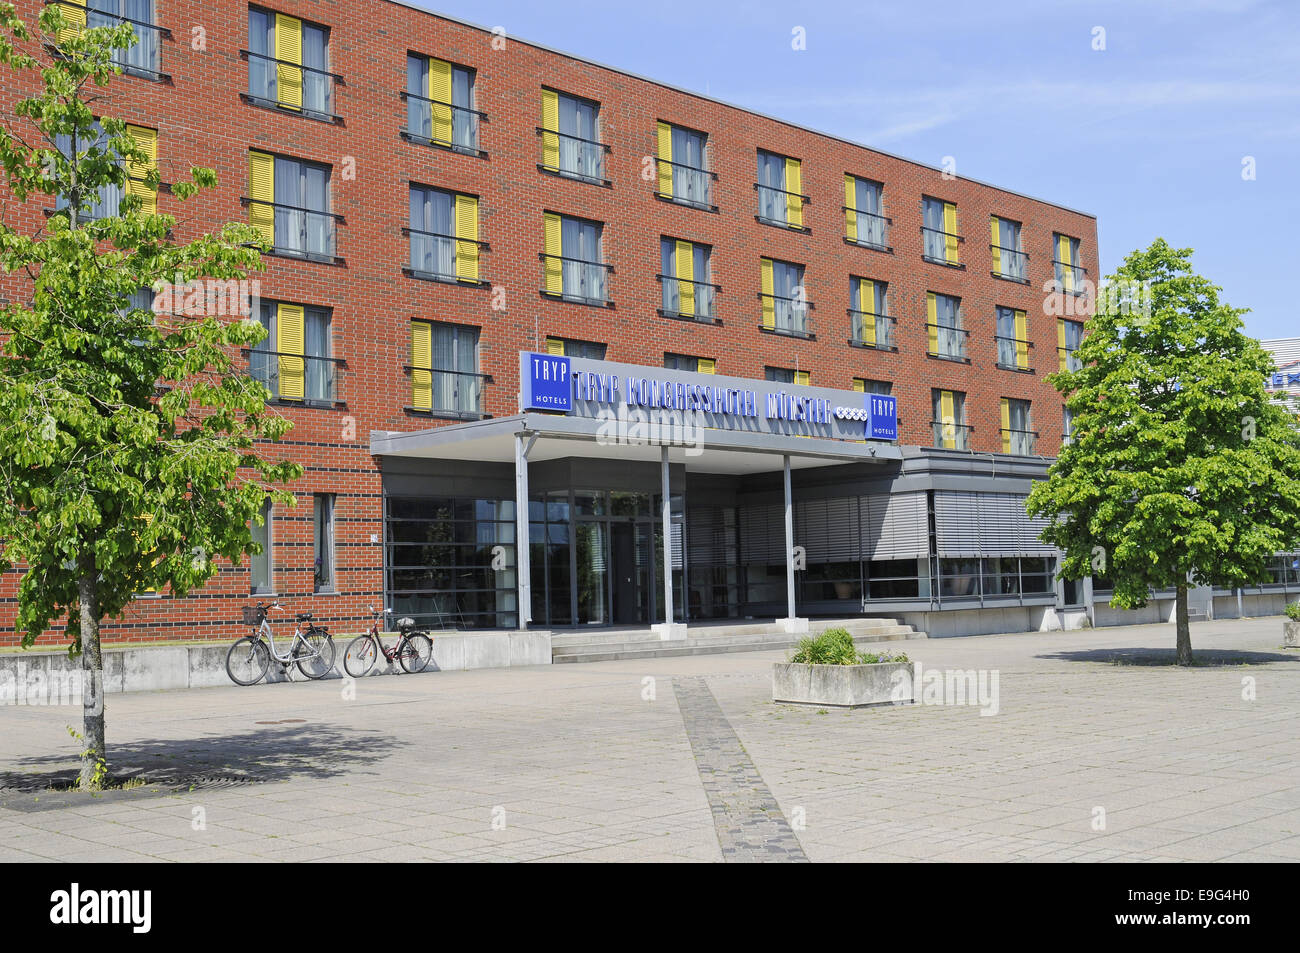 Tryp Congress Hotel, Muenster, Germany Stock Photo